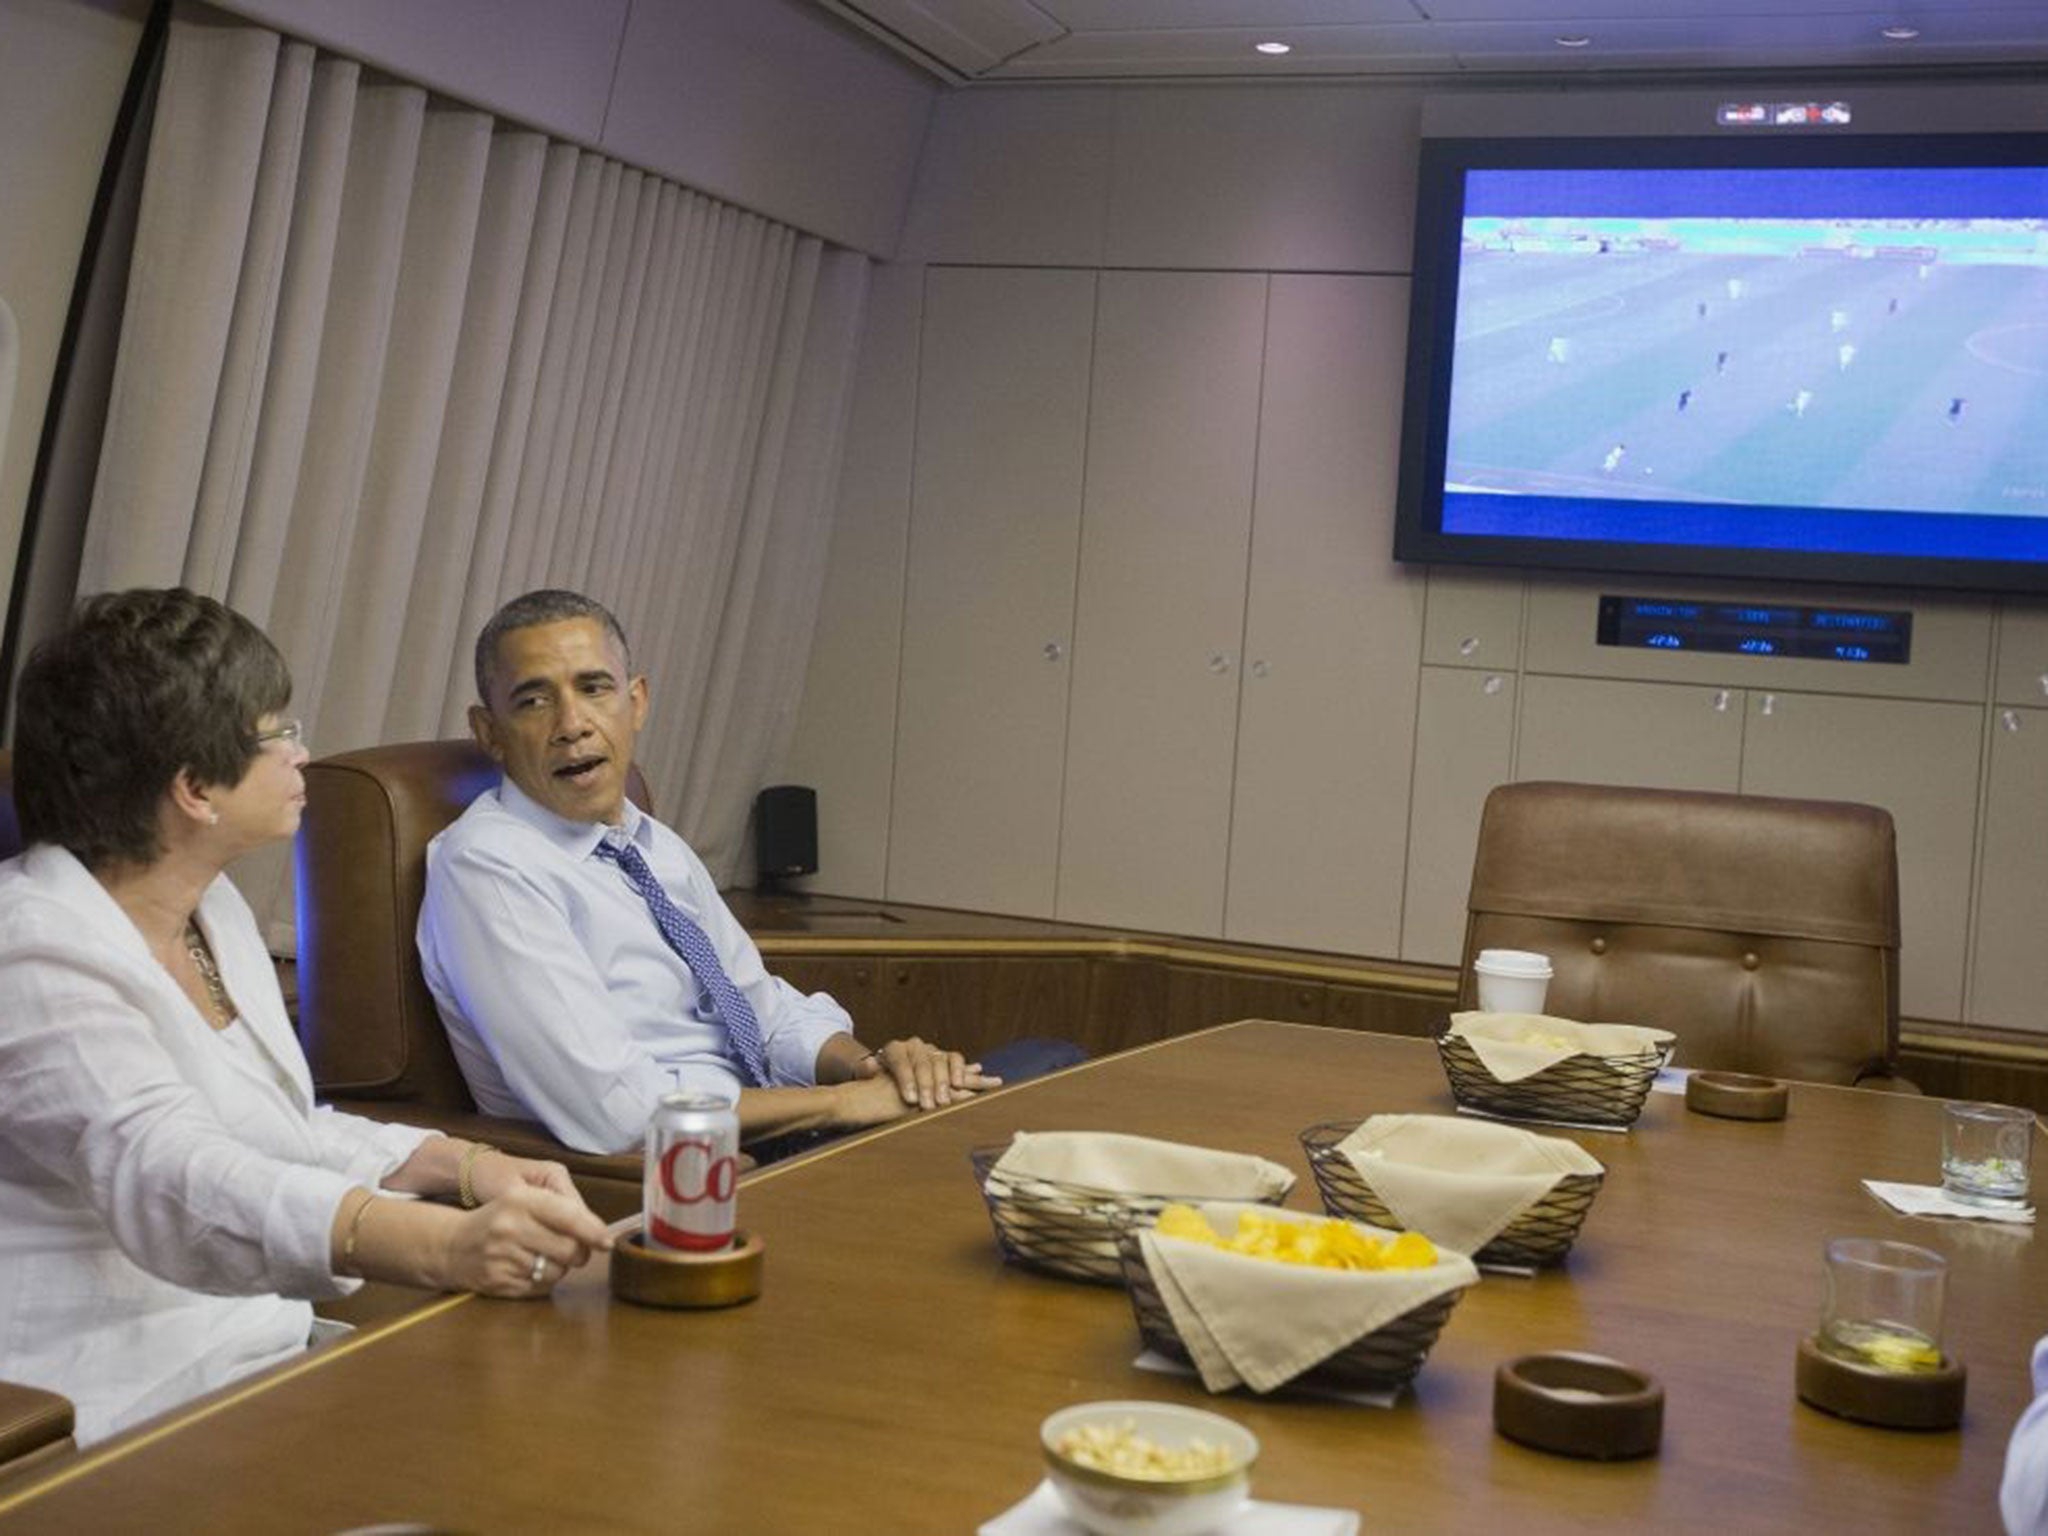 US President Barack Obama and Senior Advisor Valerie Jarrett (L) watch the 2014 World Cup match between the US and Germany while en route to Minnepolis